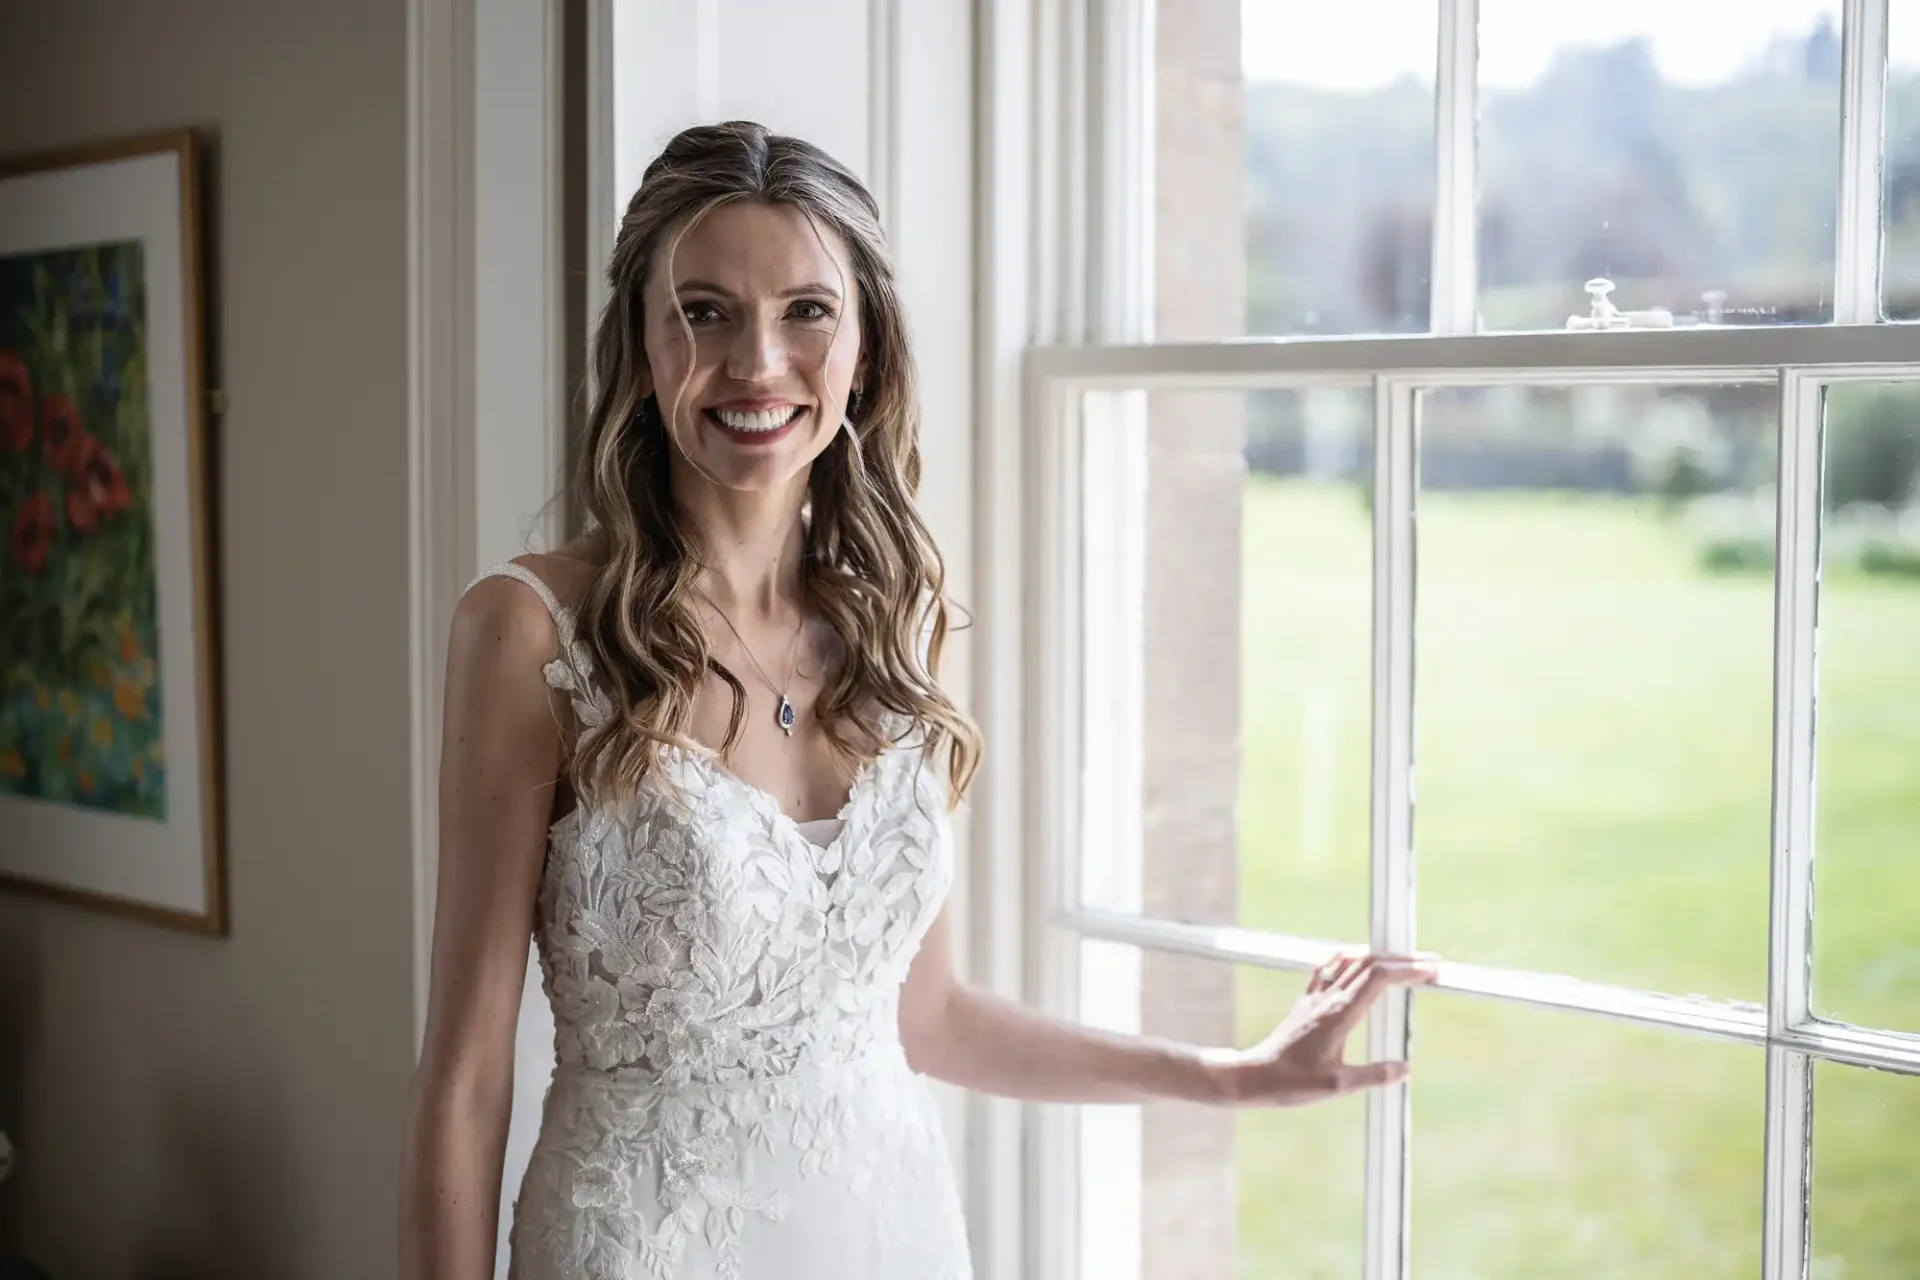 A woman in a white bridal gown stands beside a large window, smiling. She has long wavy hair and wears a pendant necklace. The background shows a green outdoor scene through the window.